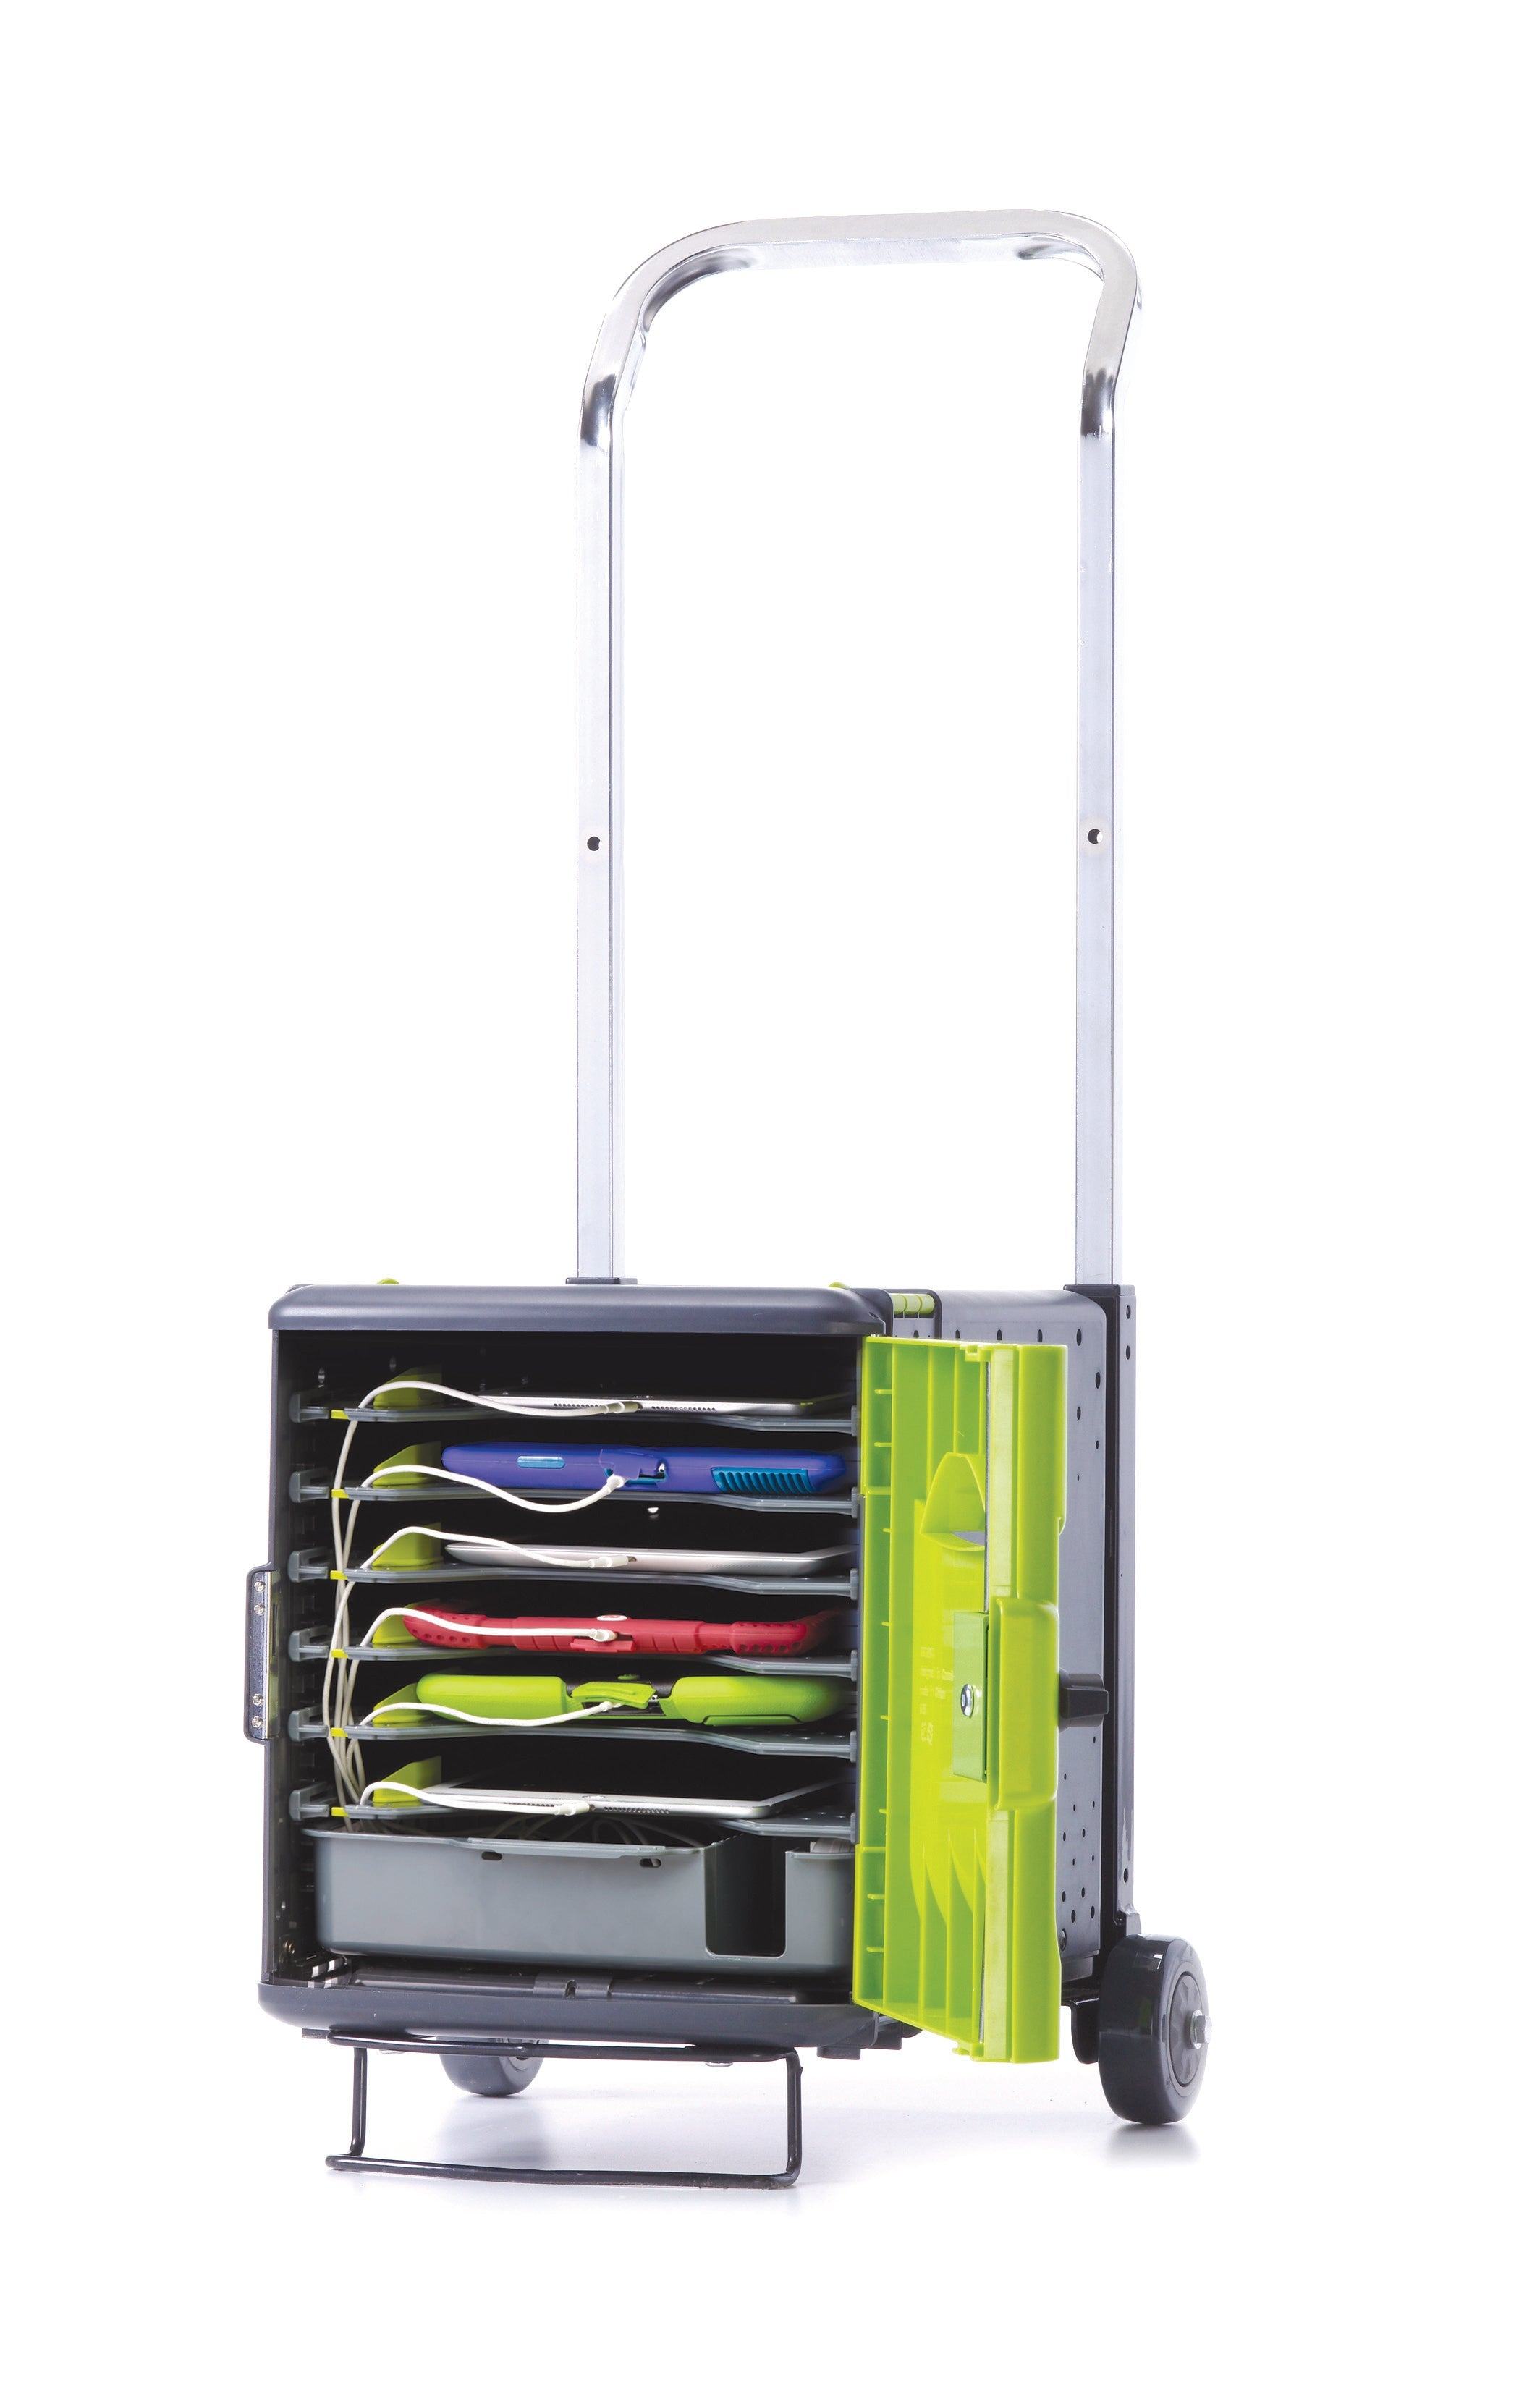 Tech Tub2 Trolley- holds 6 devices - louisekool